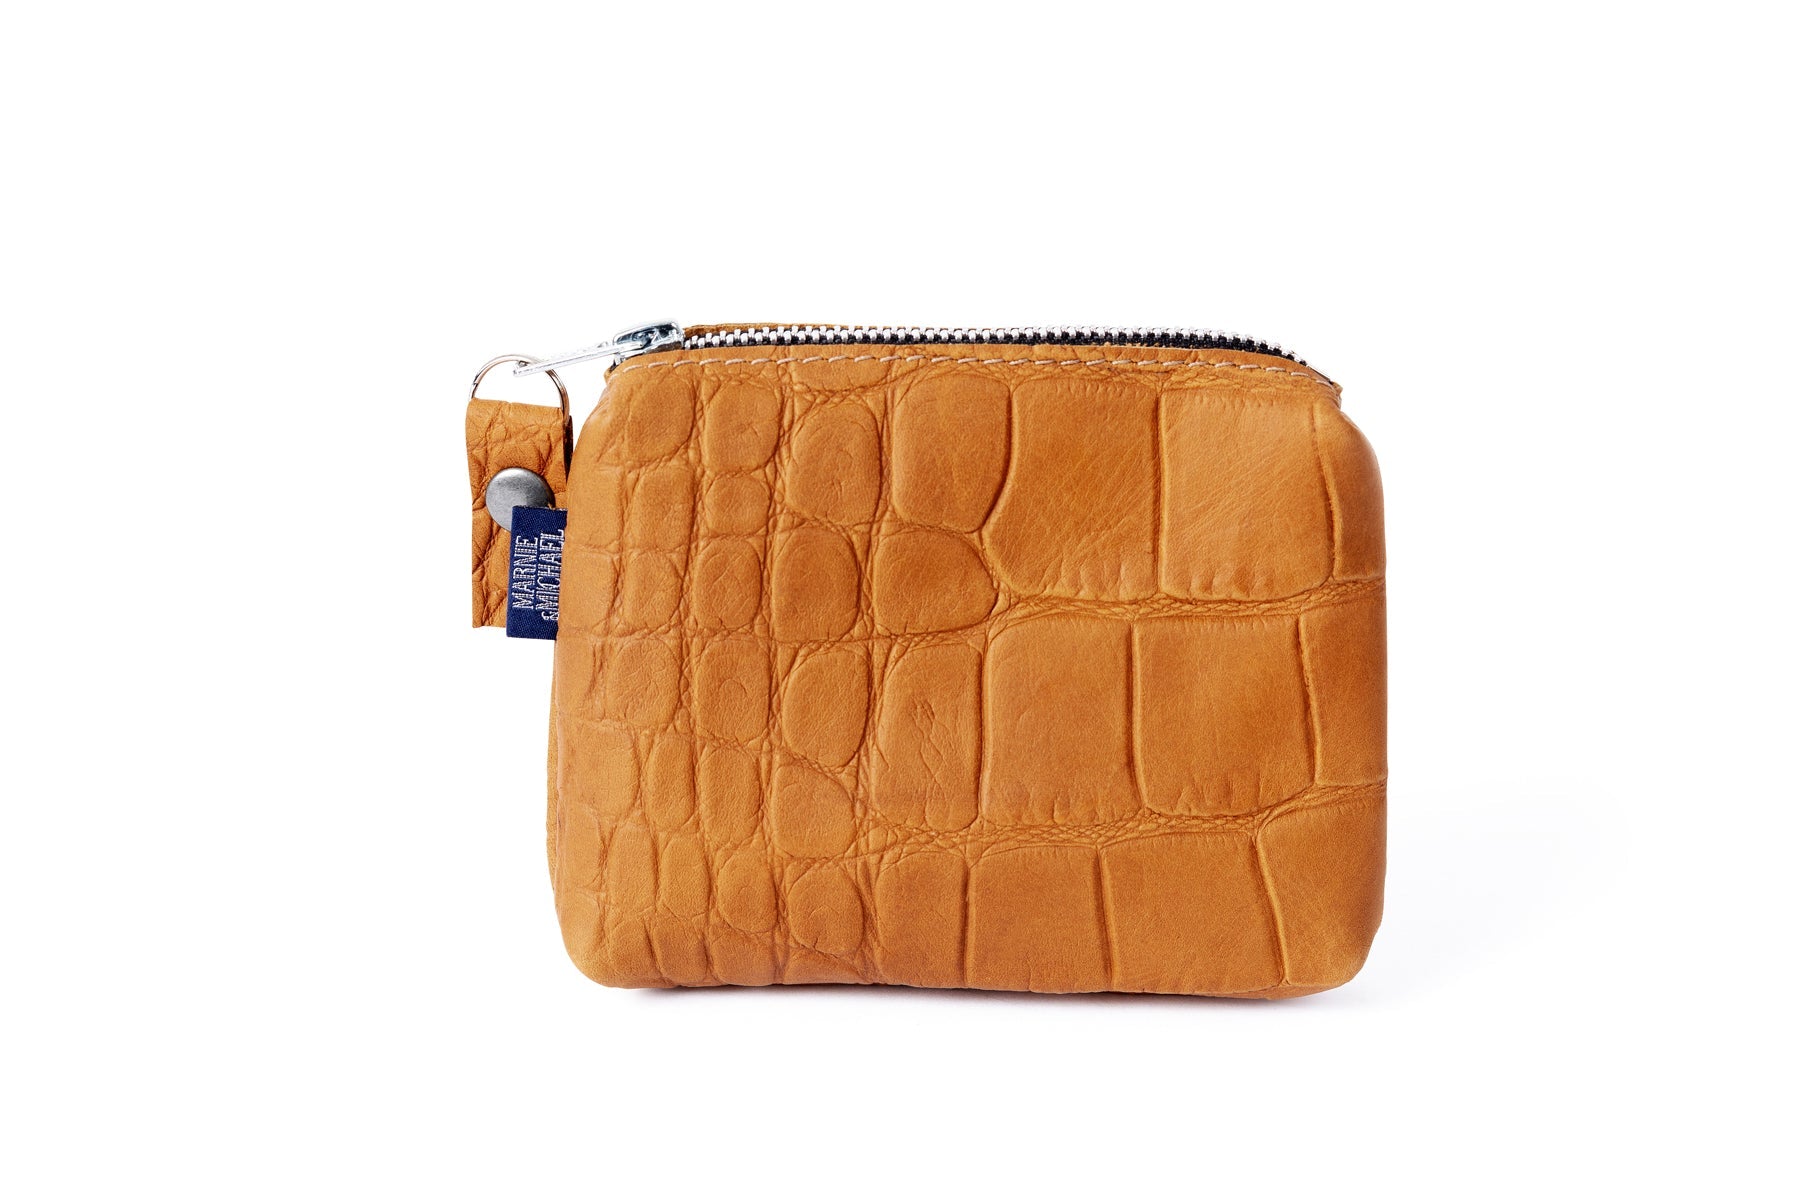 THE REVIVAL COLLECTION: Small Square Zipped Pouch